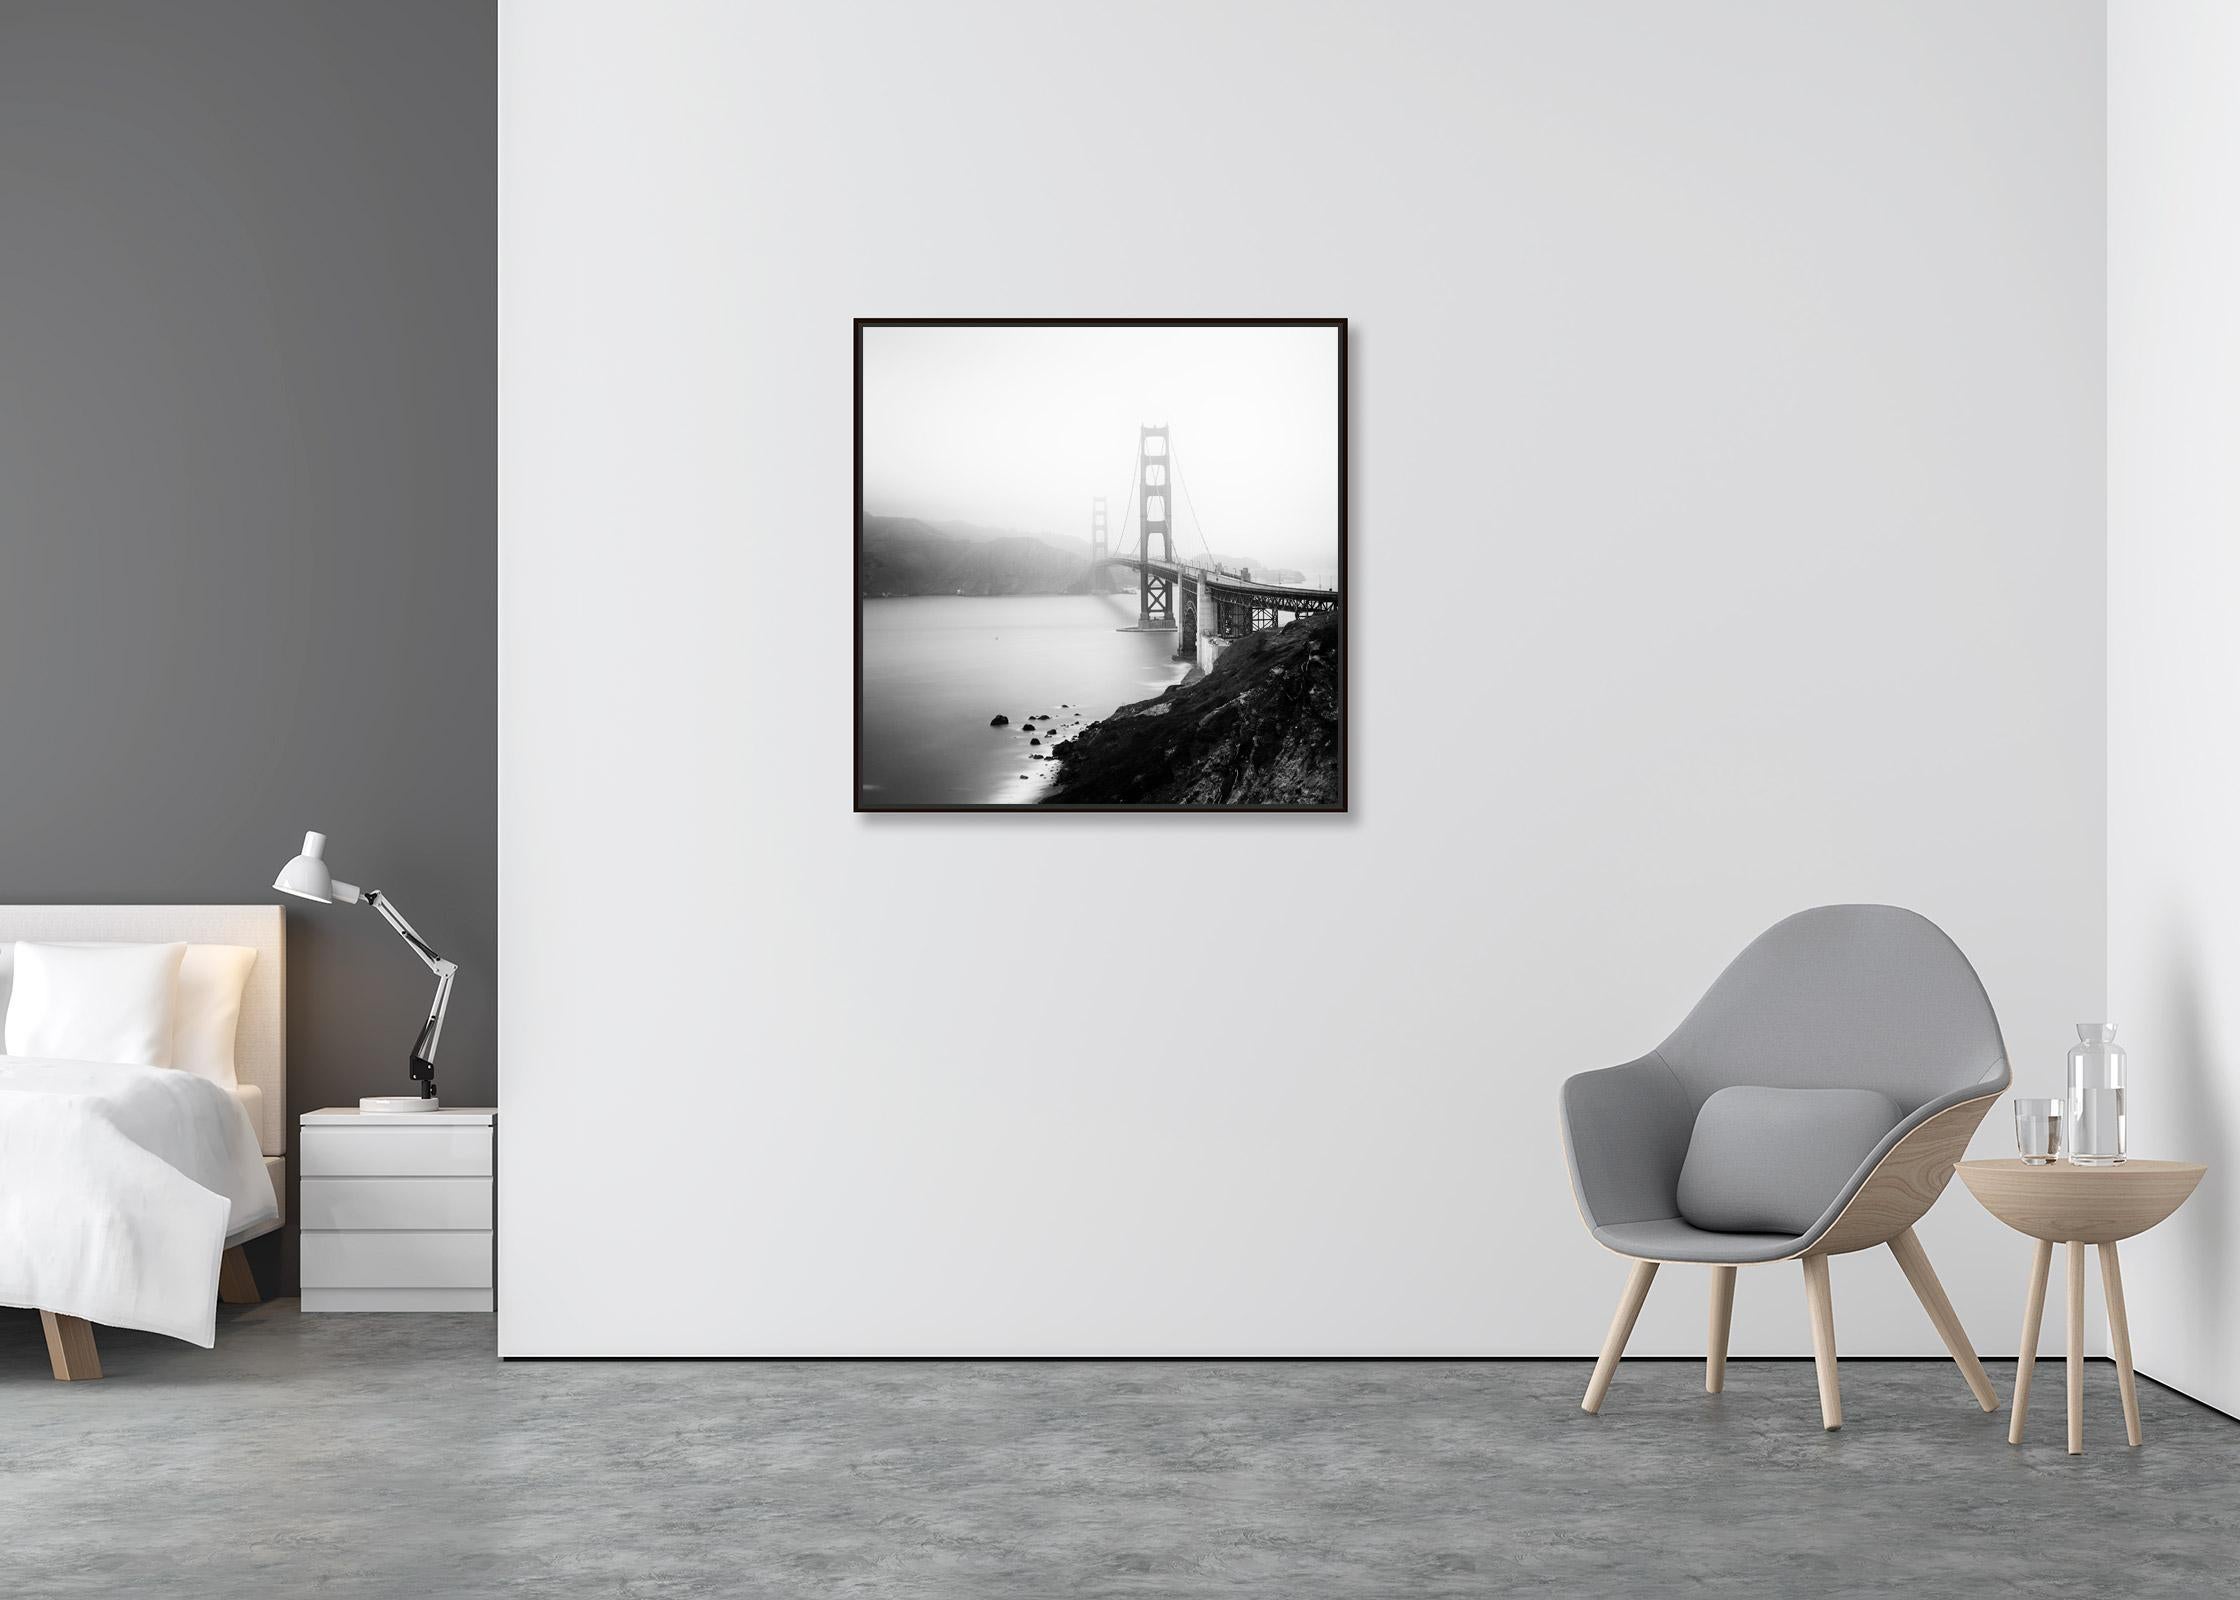 Golden Gate Bridge, San Francisco, Architecture, black and white art photography - Contemporary Photograph by Gerald Berghammer